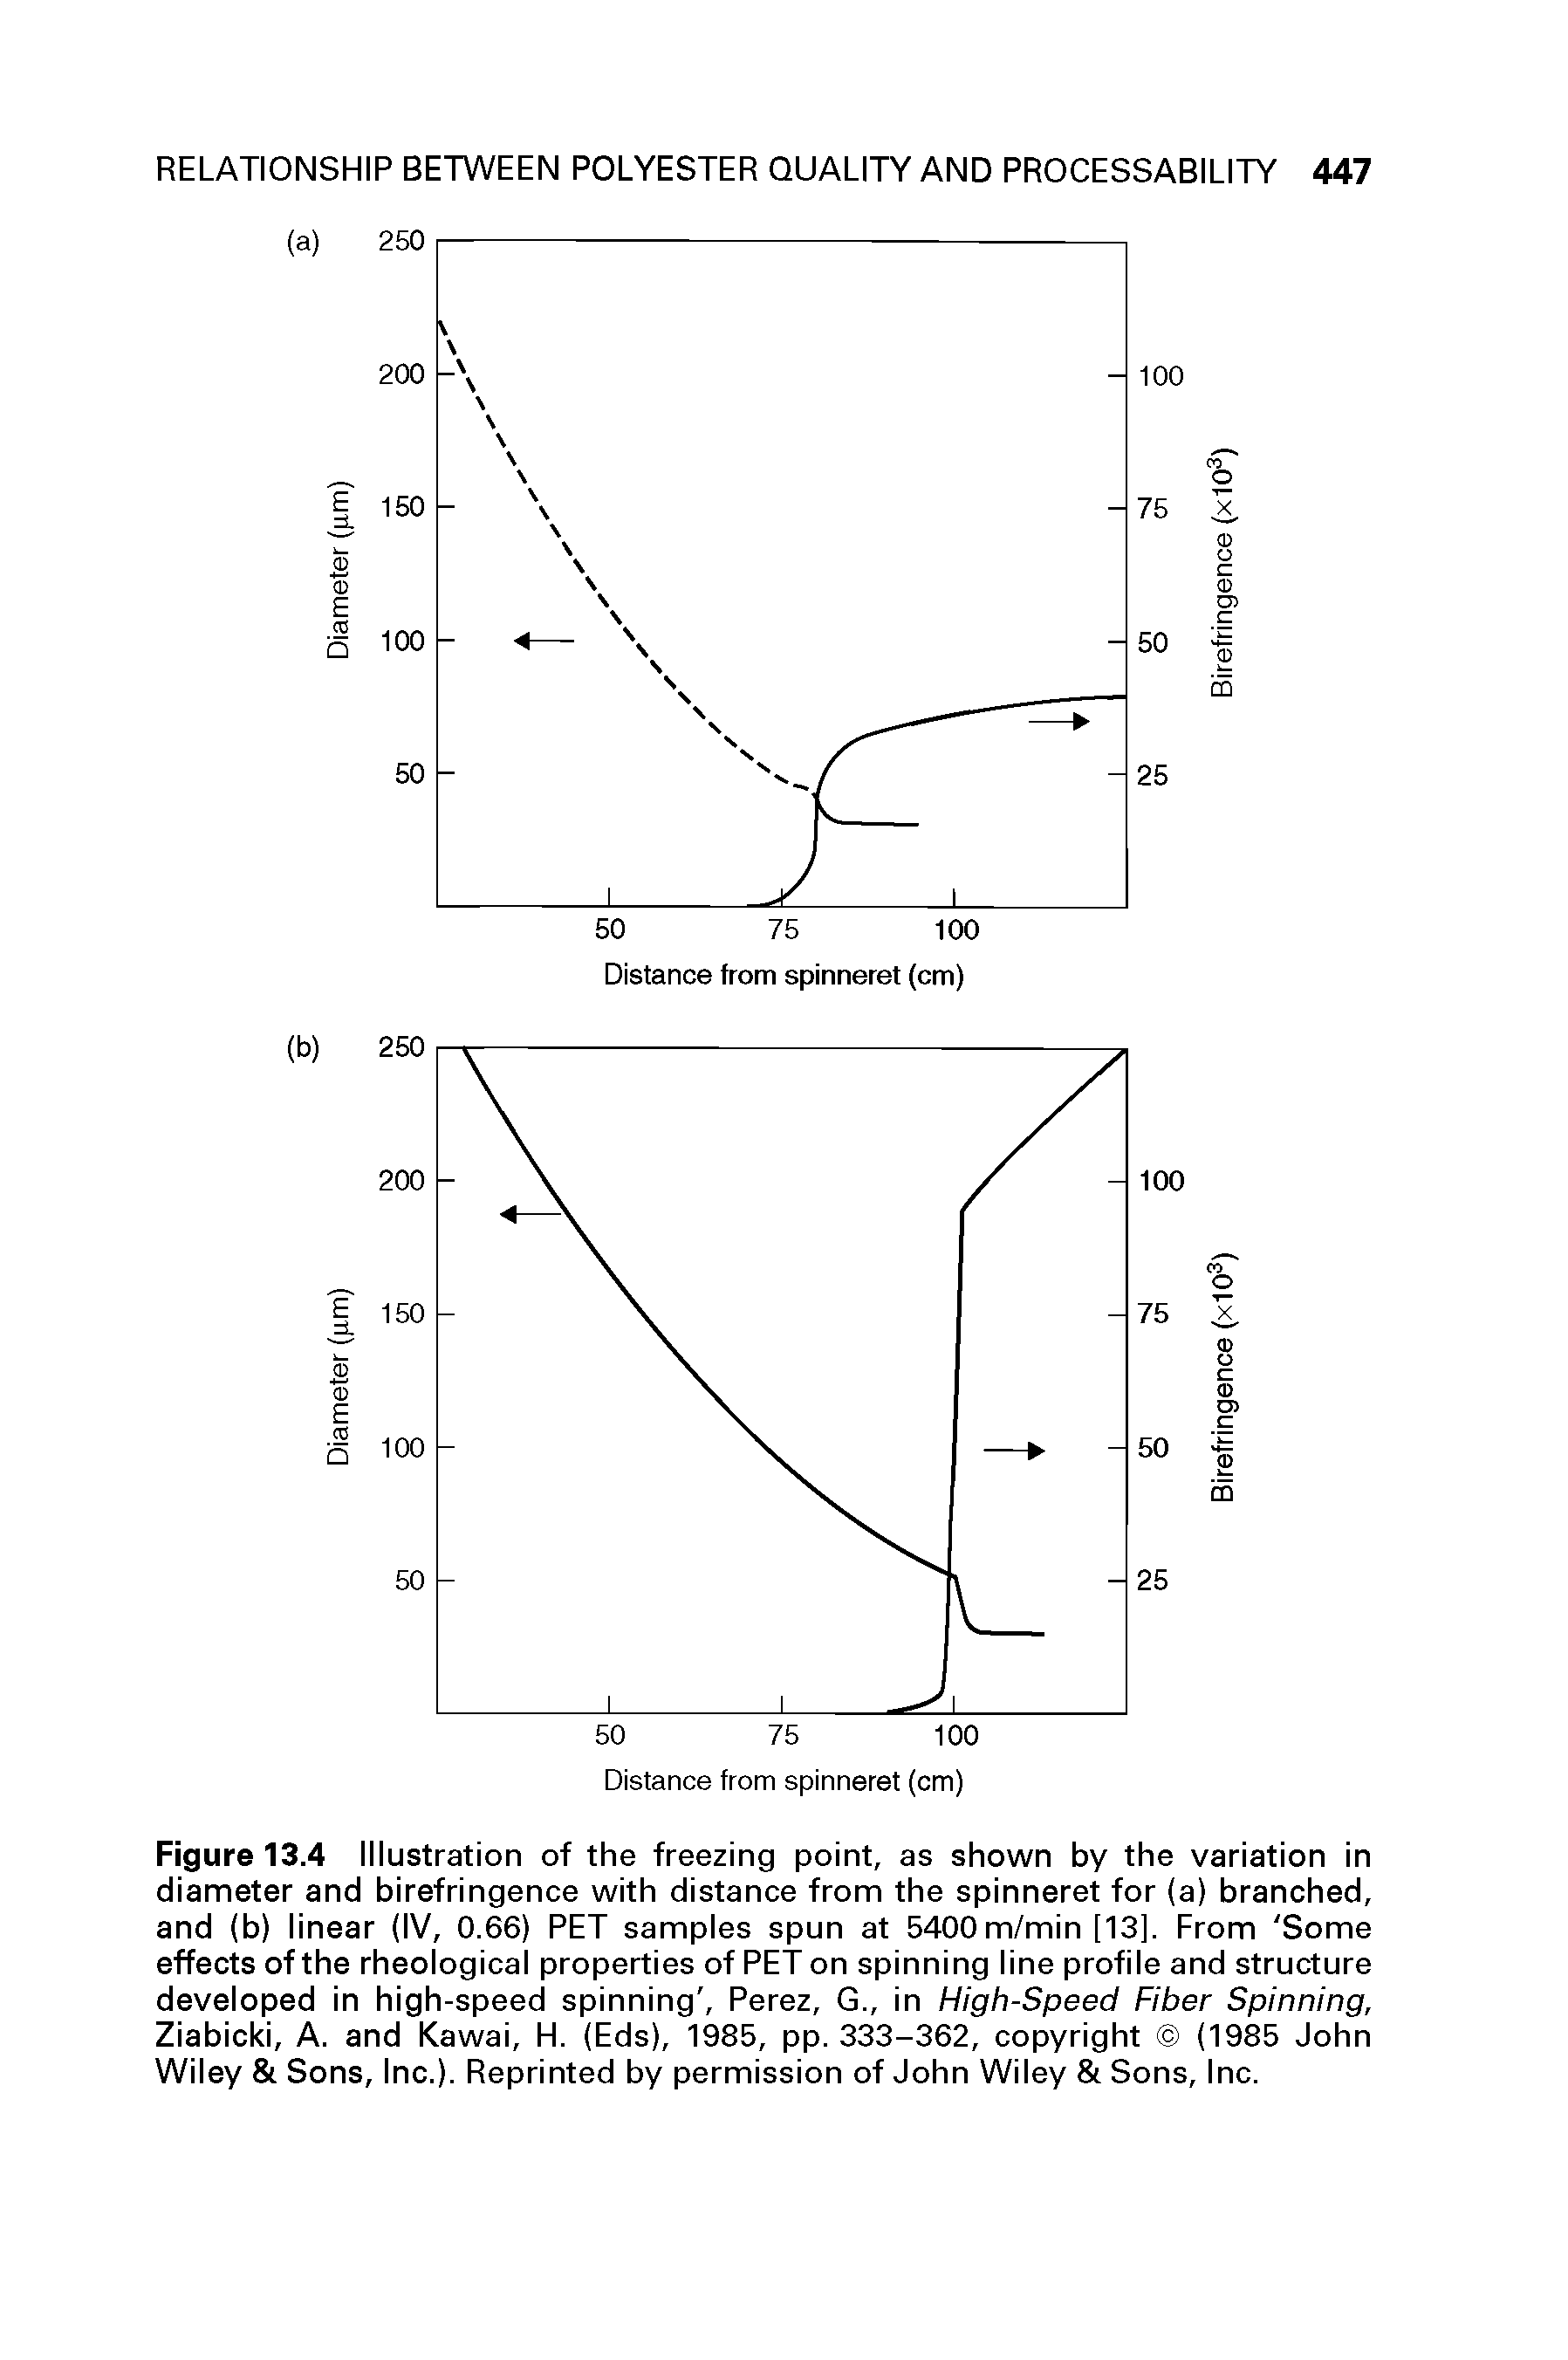 Figure 13.4 Illustration of the freezing point, as shown by the variation in diameter and birefringence with distance from the spinneret for (a) branched, and (b) linear (IV, 0.66) PET samples spun at 5400m/min [13]. From Some effects of the rheological properties of PET on spinning line profile and structure developed in high-speed spinning, Perez, G., in High-Speed Fiber Spinning, Ziabicki, A. and Kawai, H. (Eds), 1985, pp. 333-362, copyright (1985 John Wiley Sons, Inc.). Reprinted by permission of John Wiley Sons, Inc.